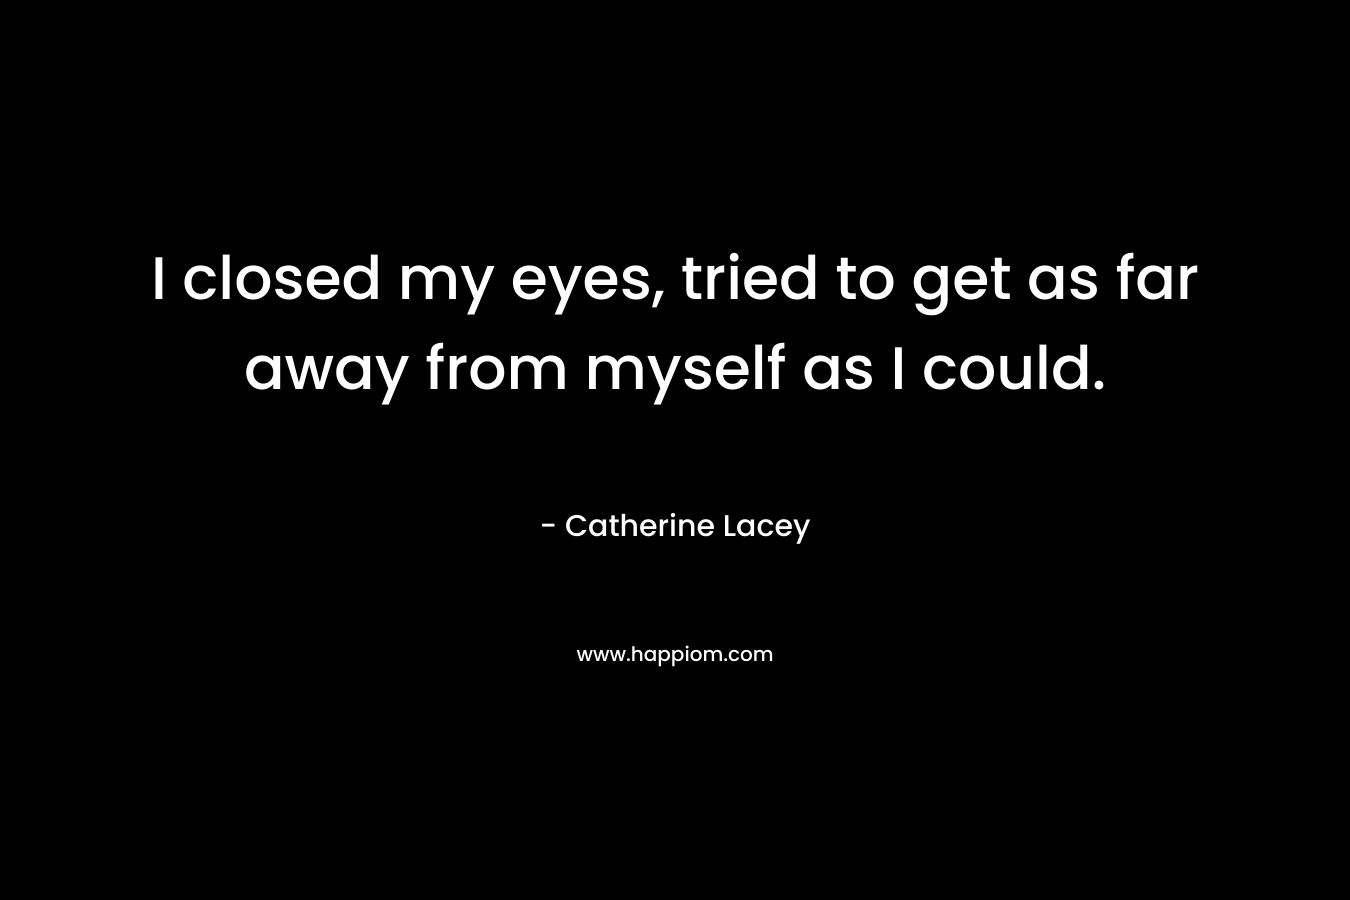 I closed my eyes, tried to get as far away from myself as I could. – Catherine Lacey